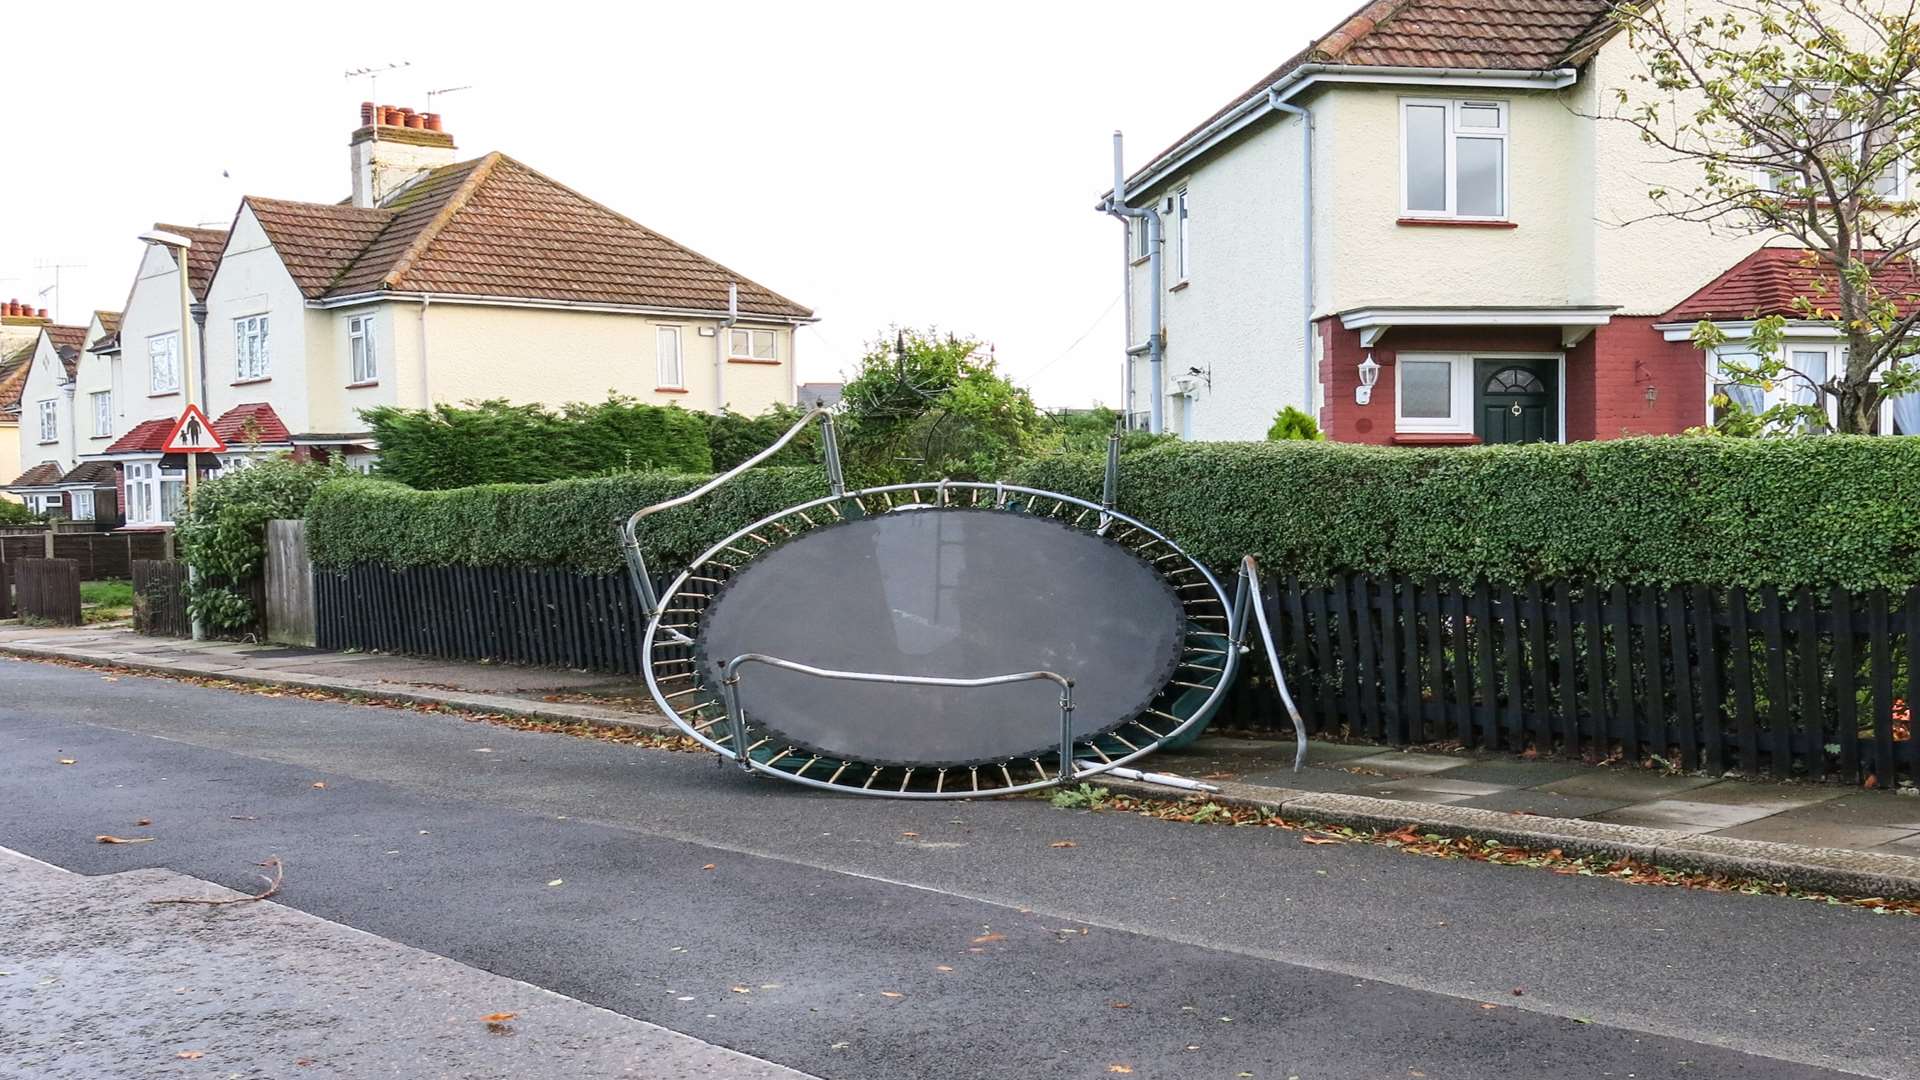 A lonely and battered trampoline in Dering Road, Herne Bay